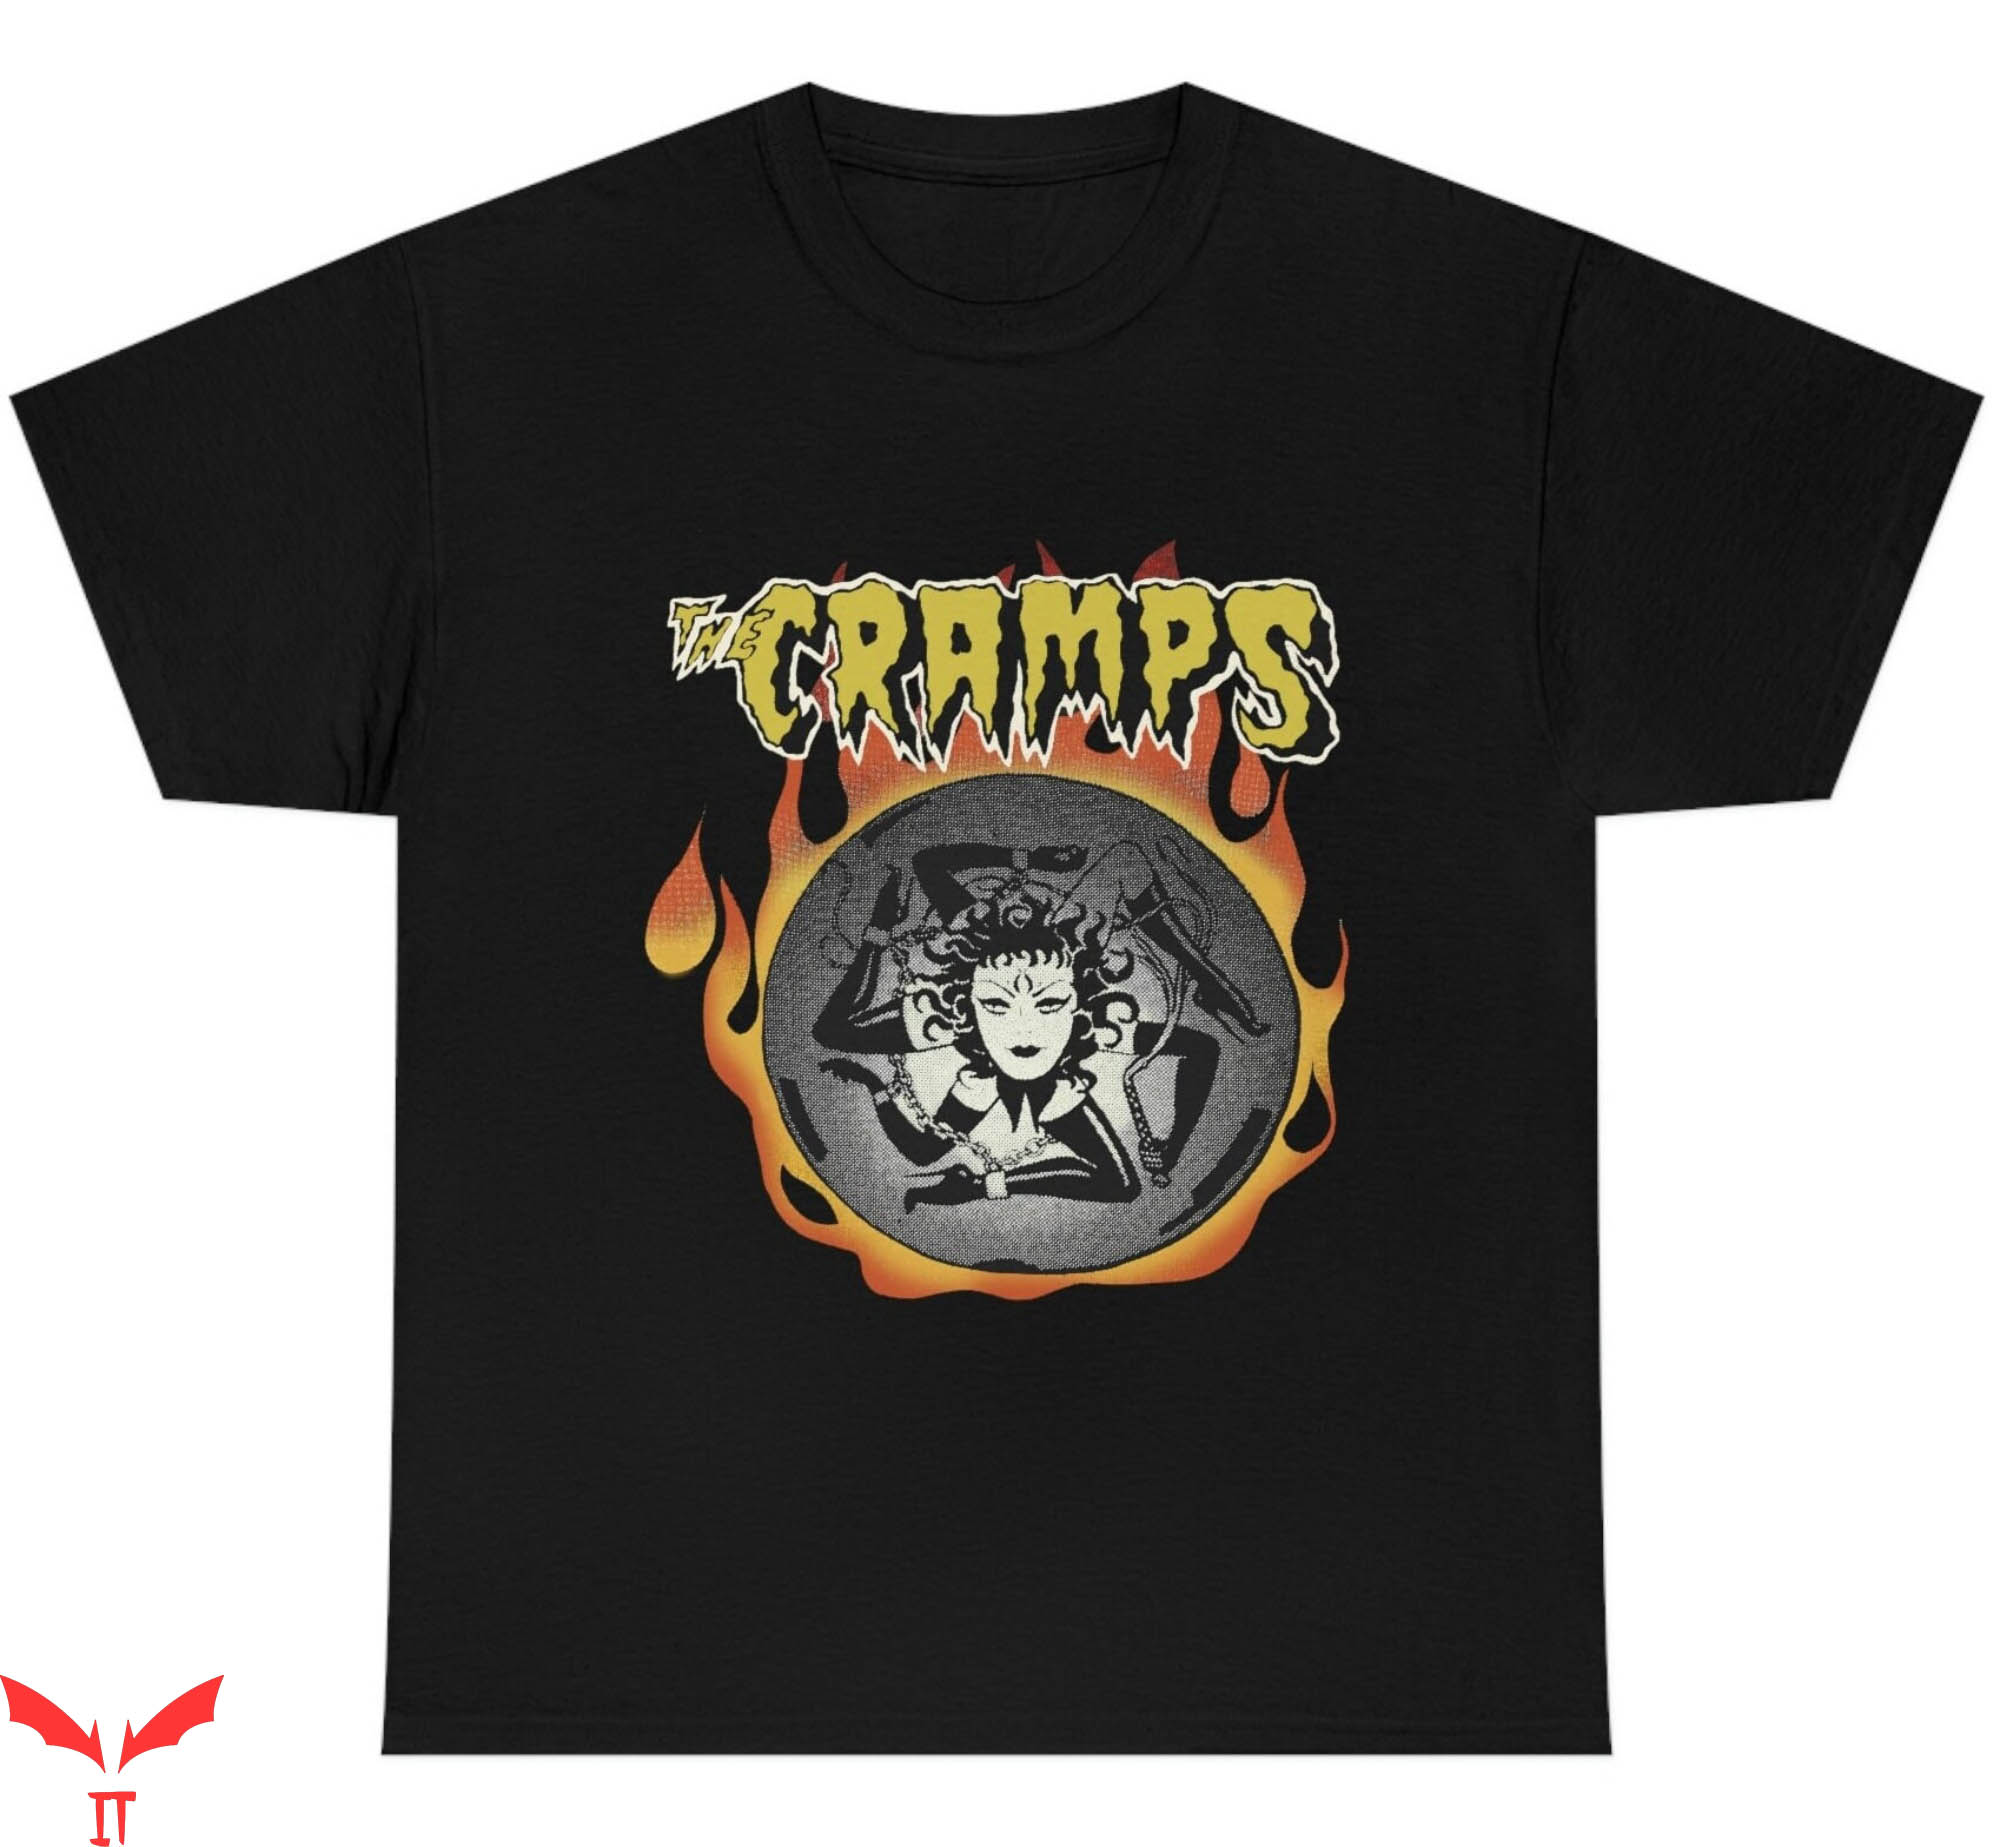 Vintage Cramps T-Shirt Halloween Party 1980s The Cramps Tee